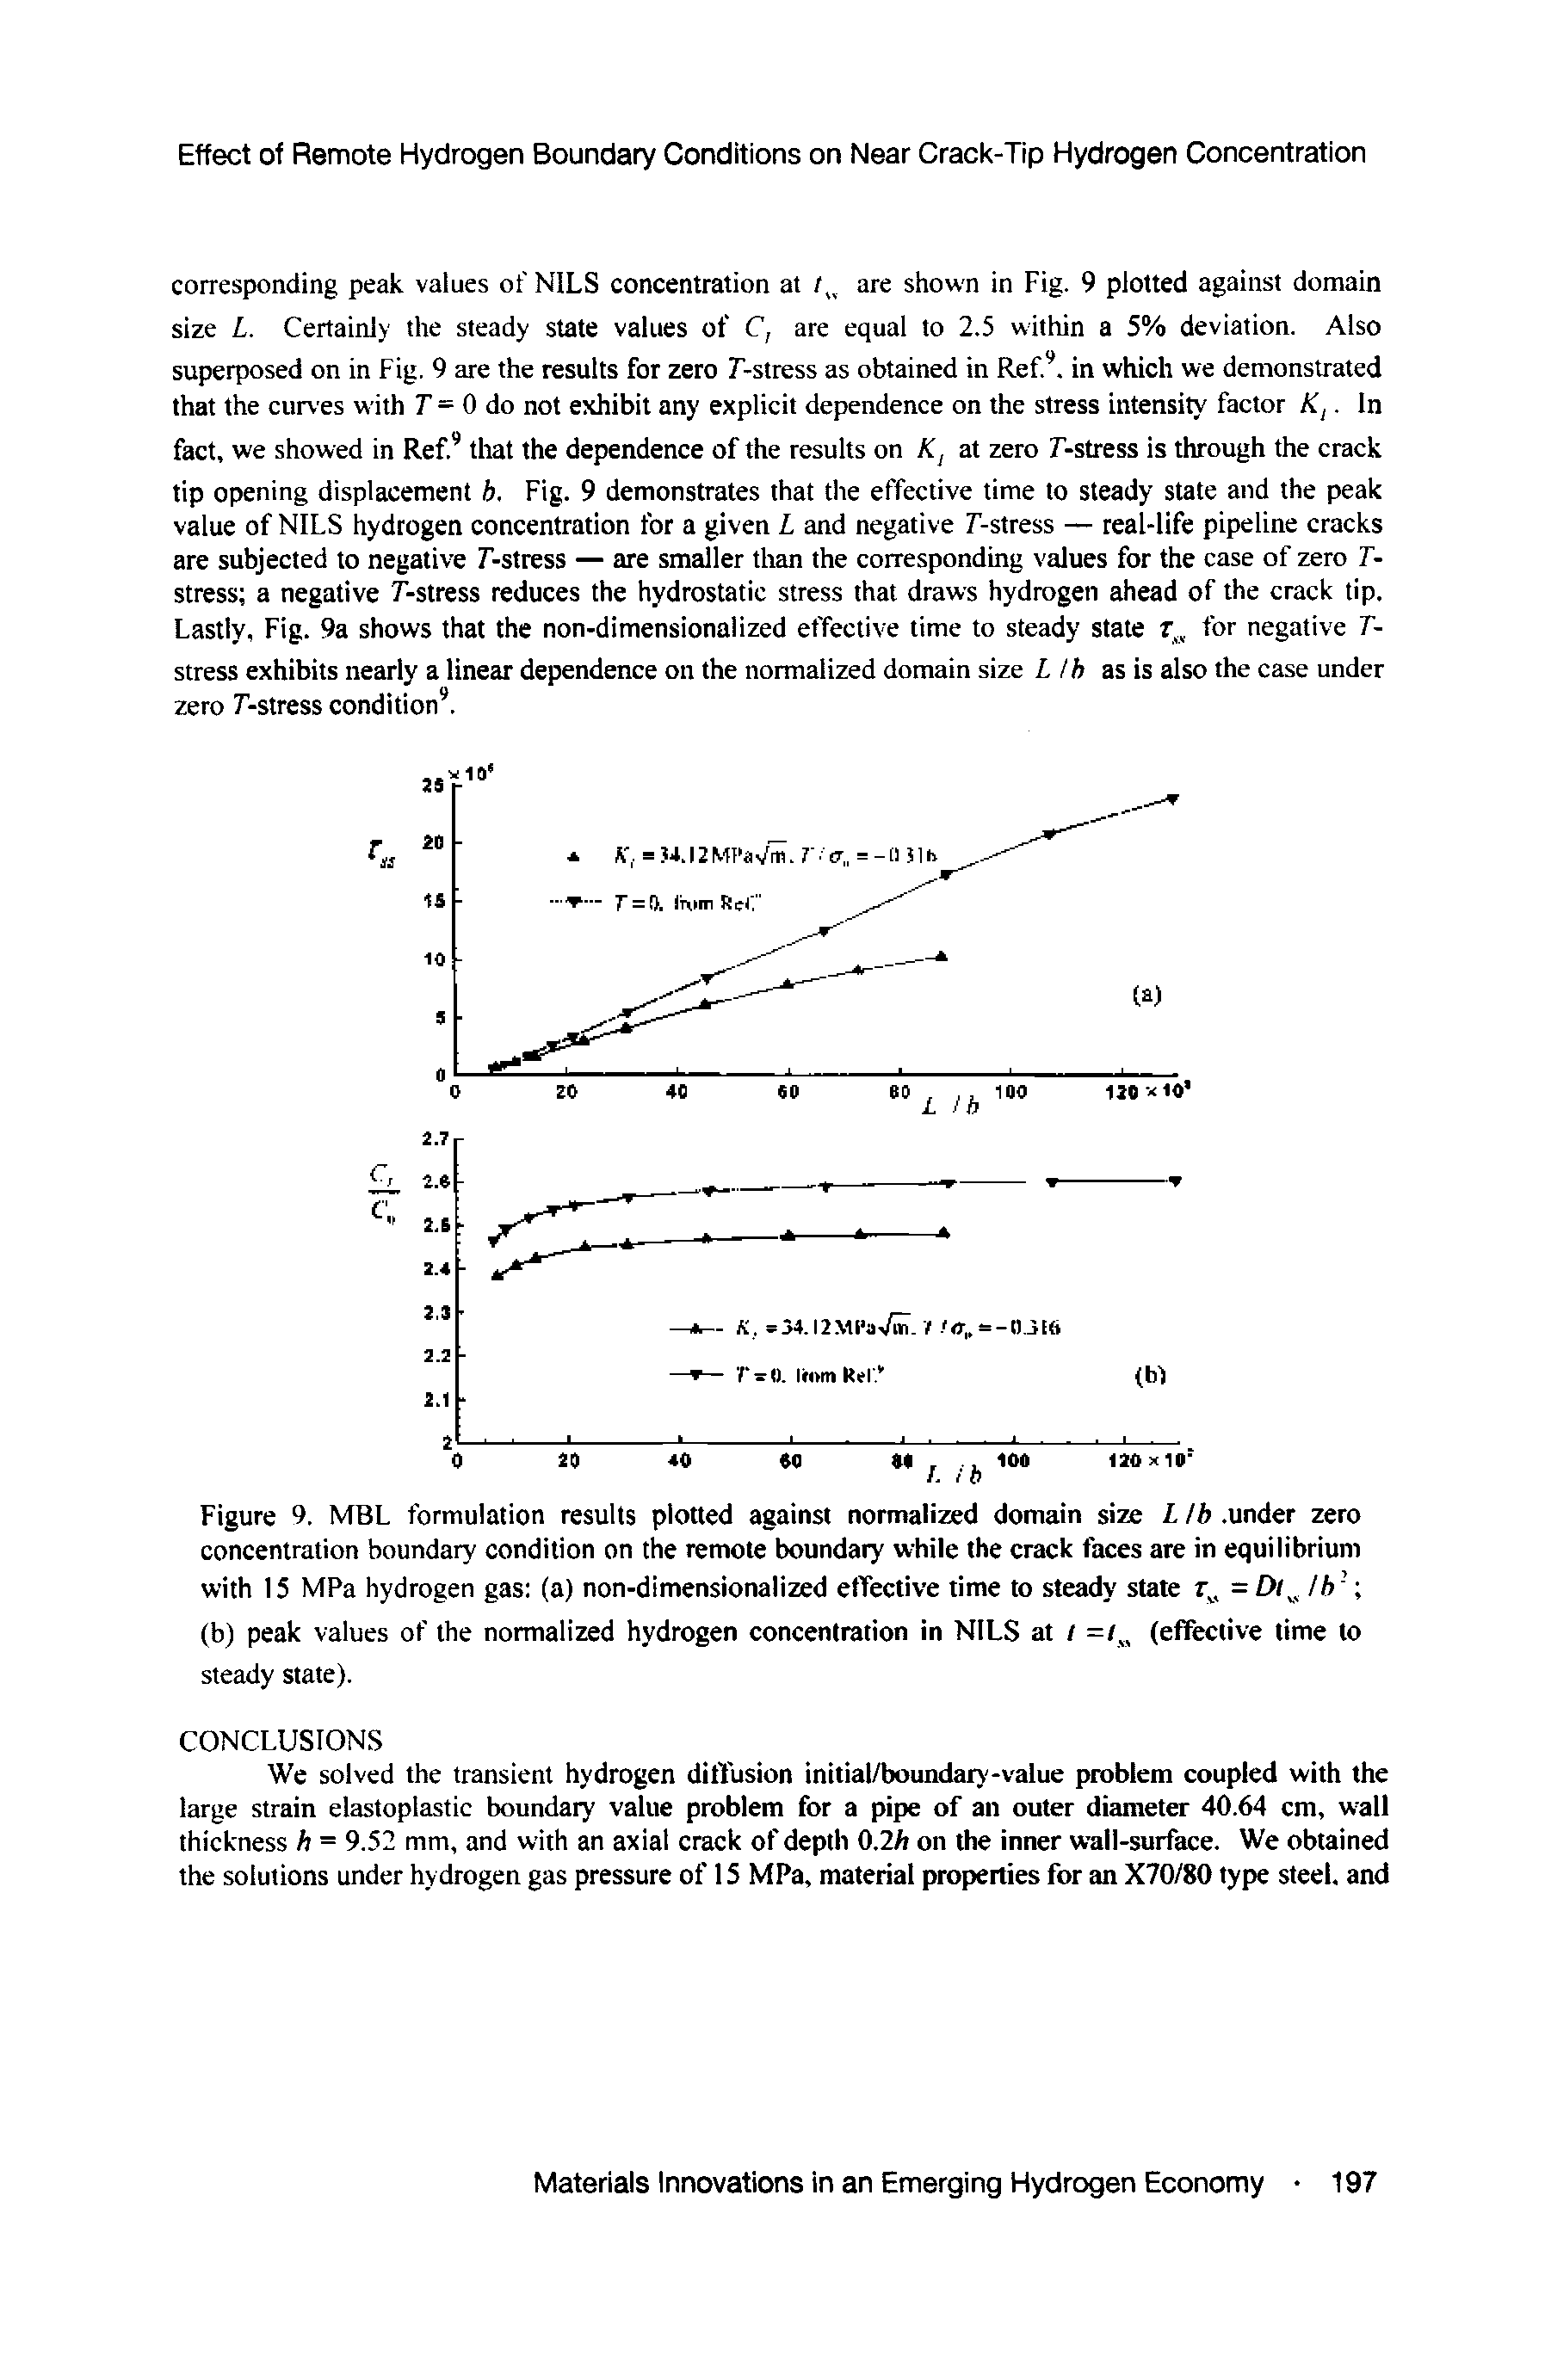 Figure 9. MBL formulation results plotted against normalized domain size L lb. under zero concentration boundary condition on the remote boundary while the crack faces are in equilibrium with 15 MPa hydrogen gas (a) non-dimensionalized effective time to steady state = >t lb (b) peak values of the normalized hydrogen concentration in NILS at / =/ (effective time to steady state).